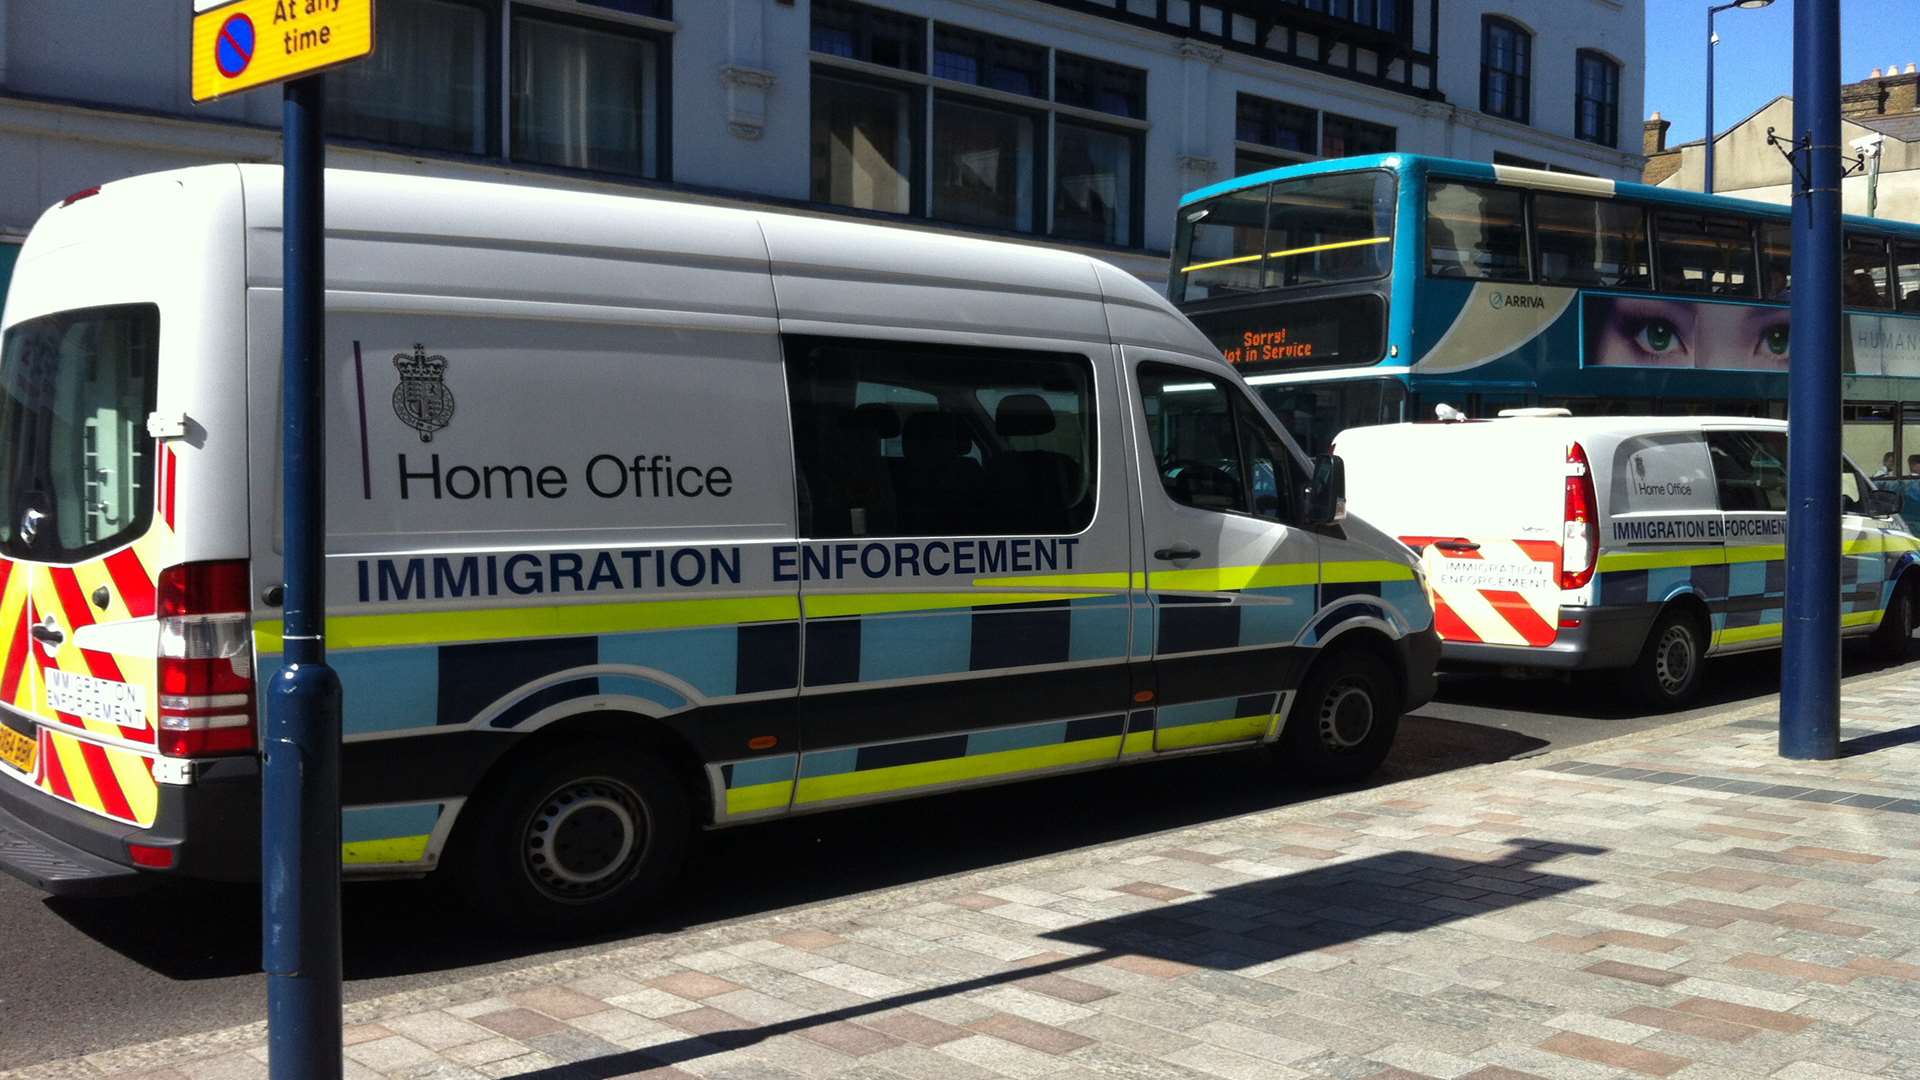 The immigration enforcement vans in Maidstone High Street